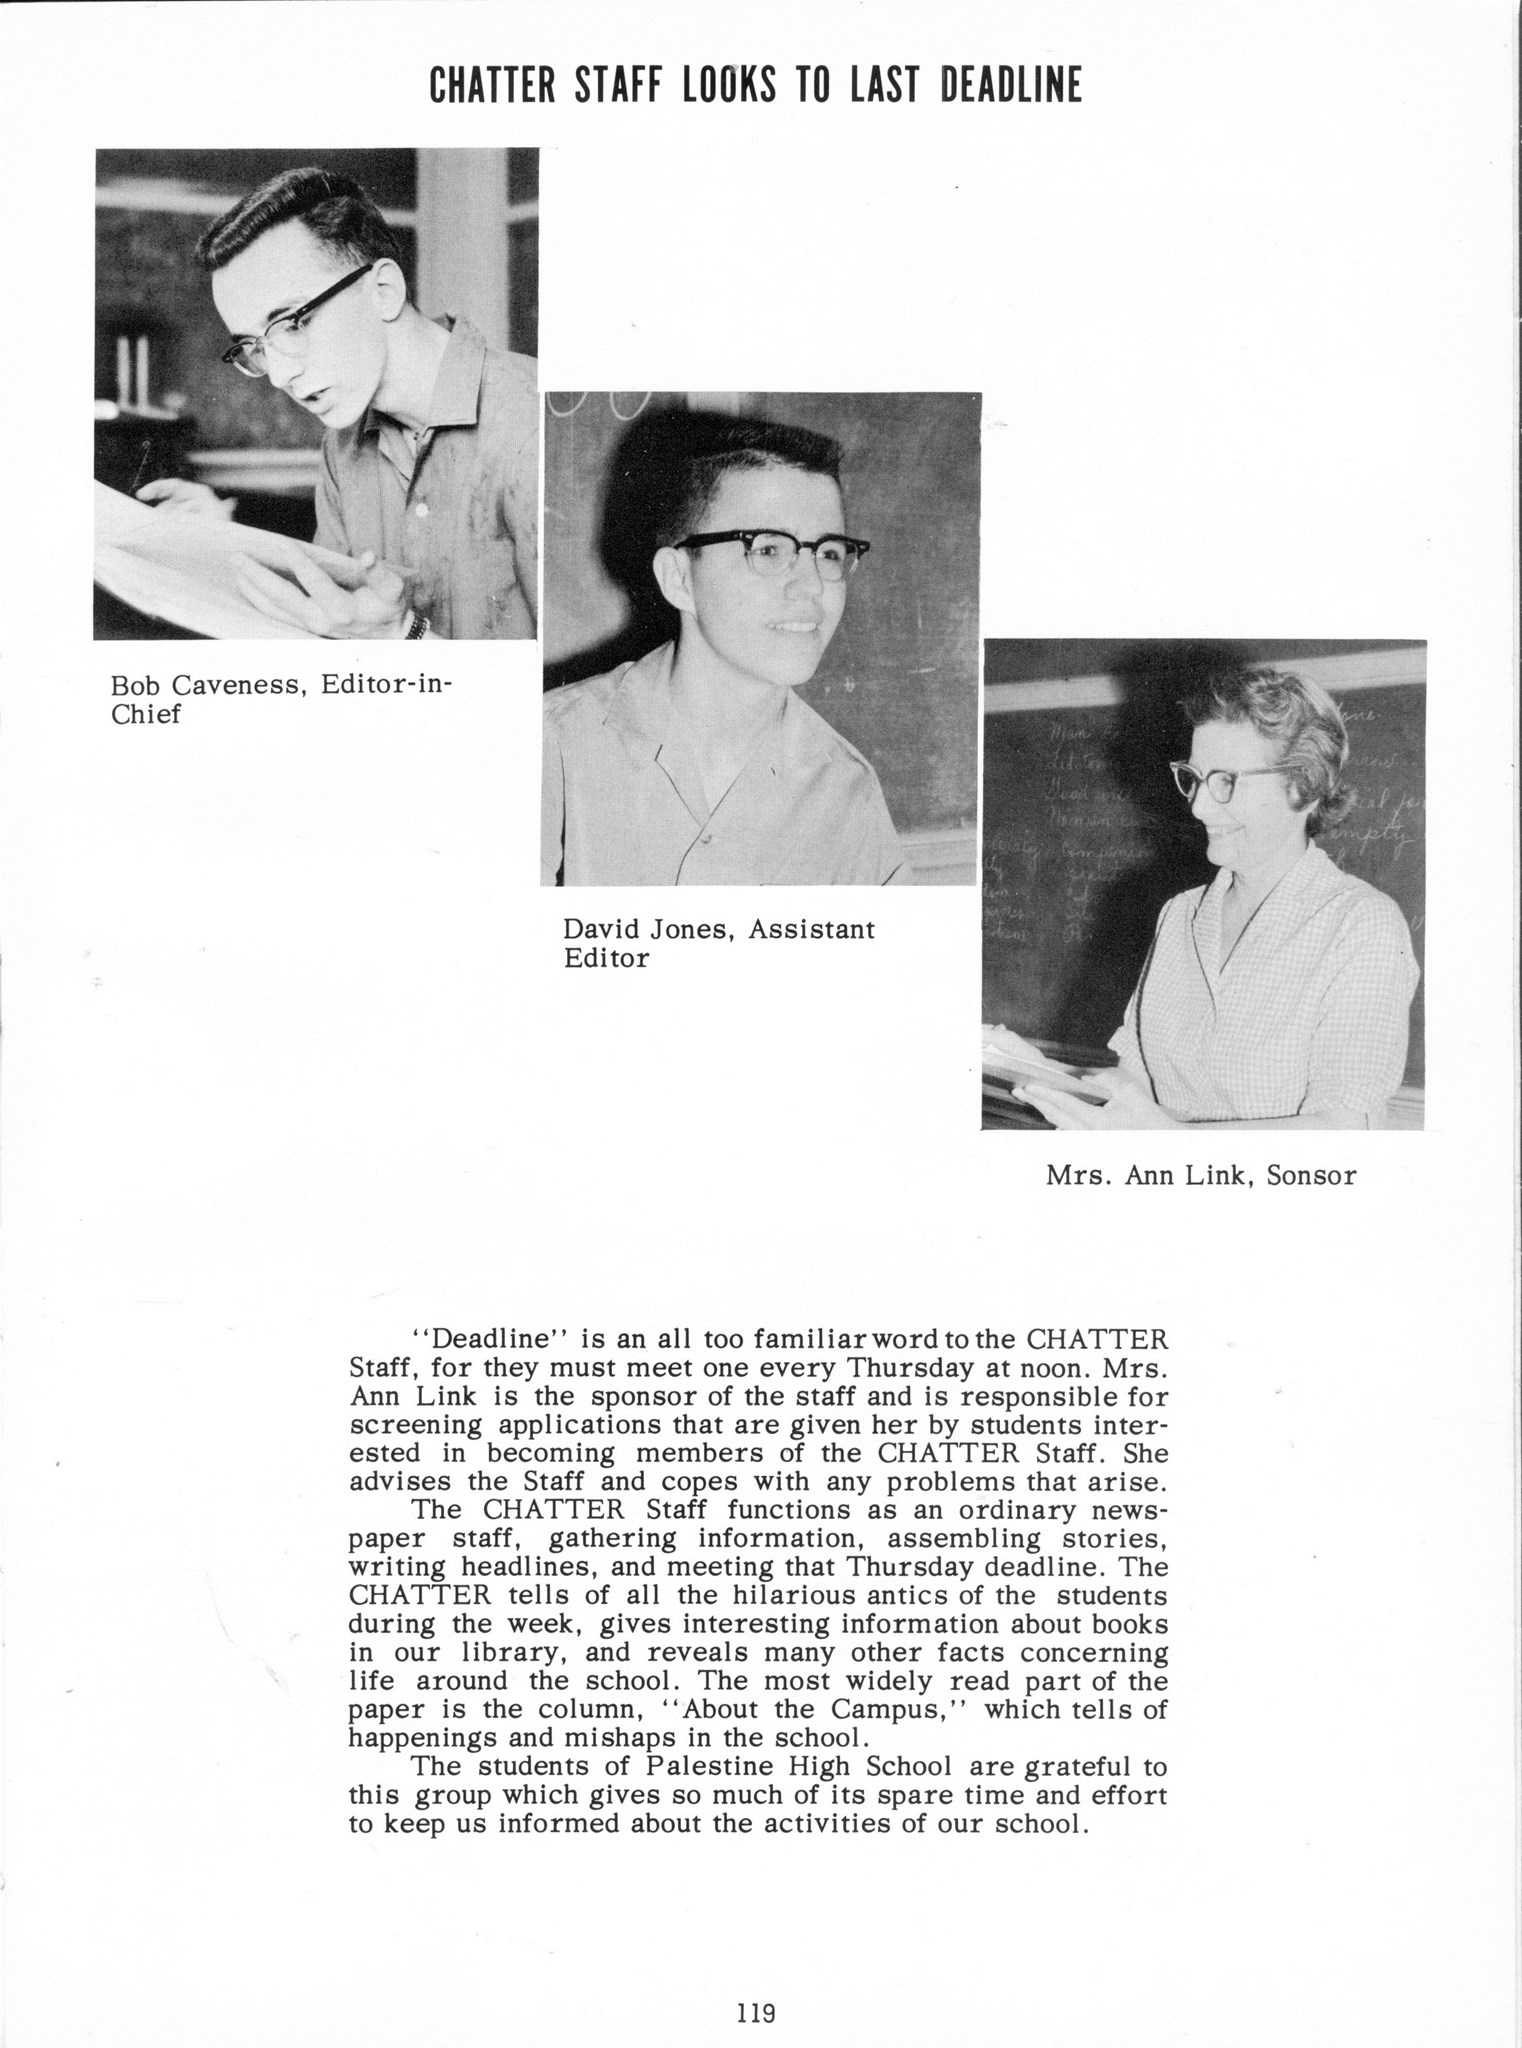 ../../../Images/Large/1960/Arclight-1960-pg0119.jpg